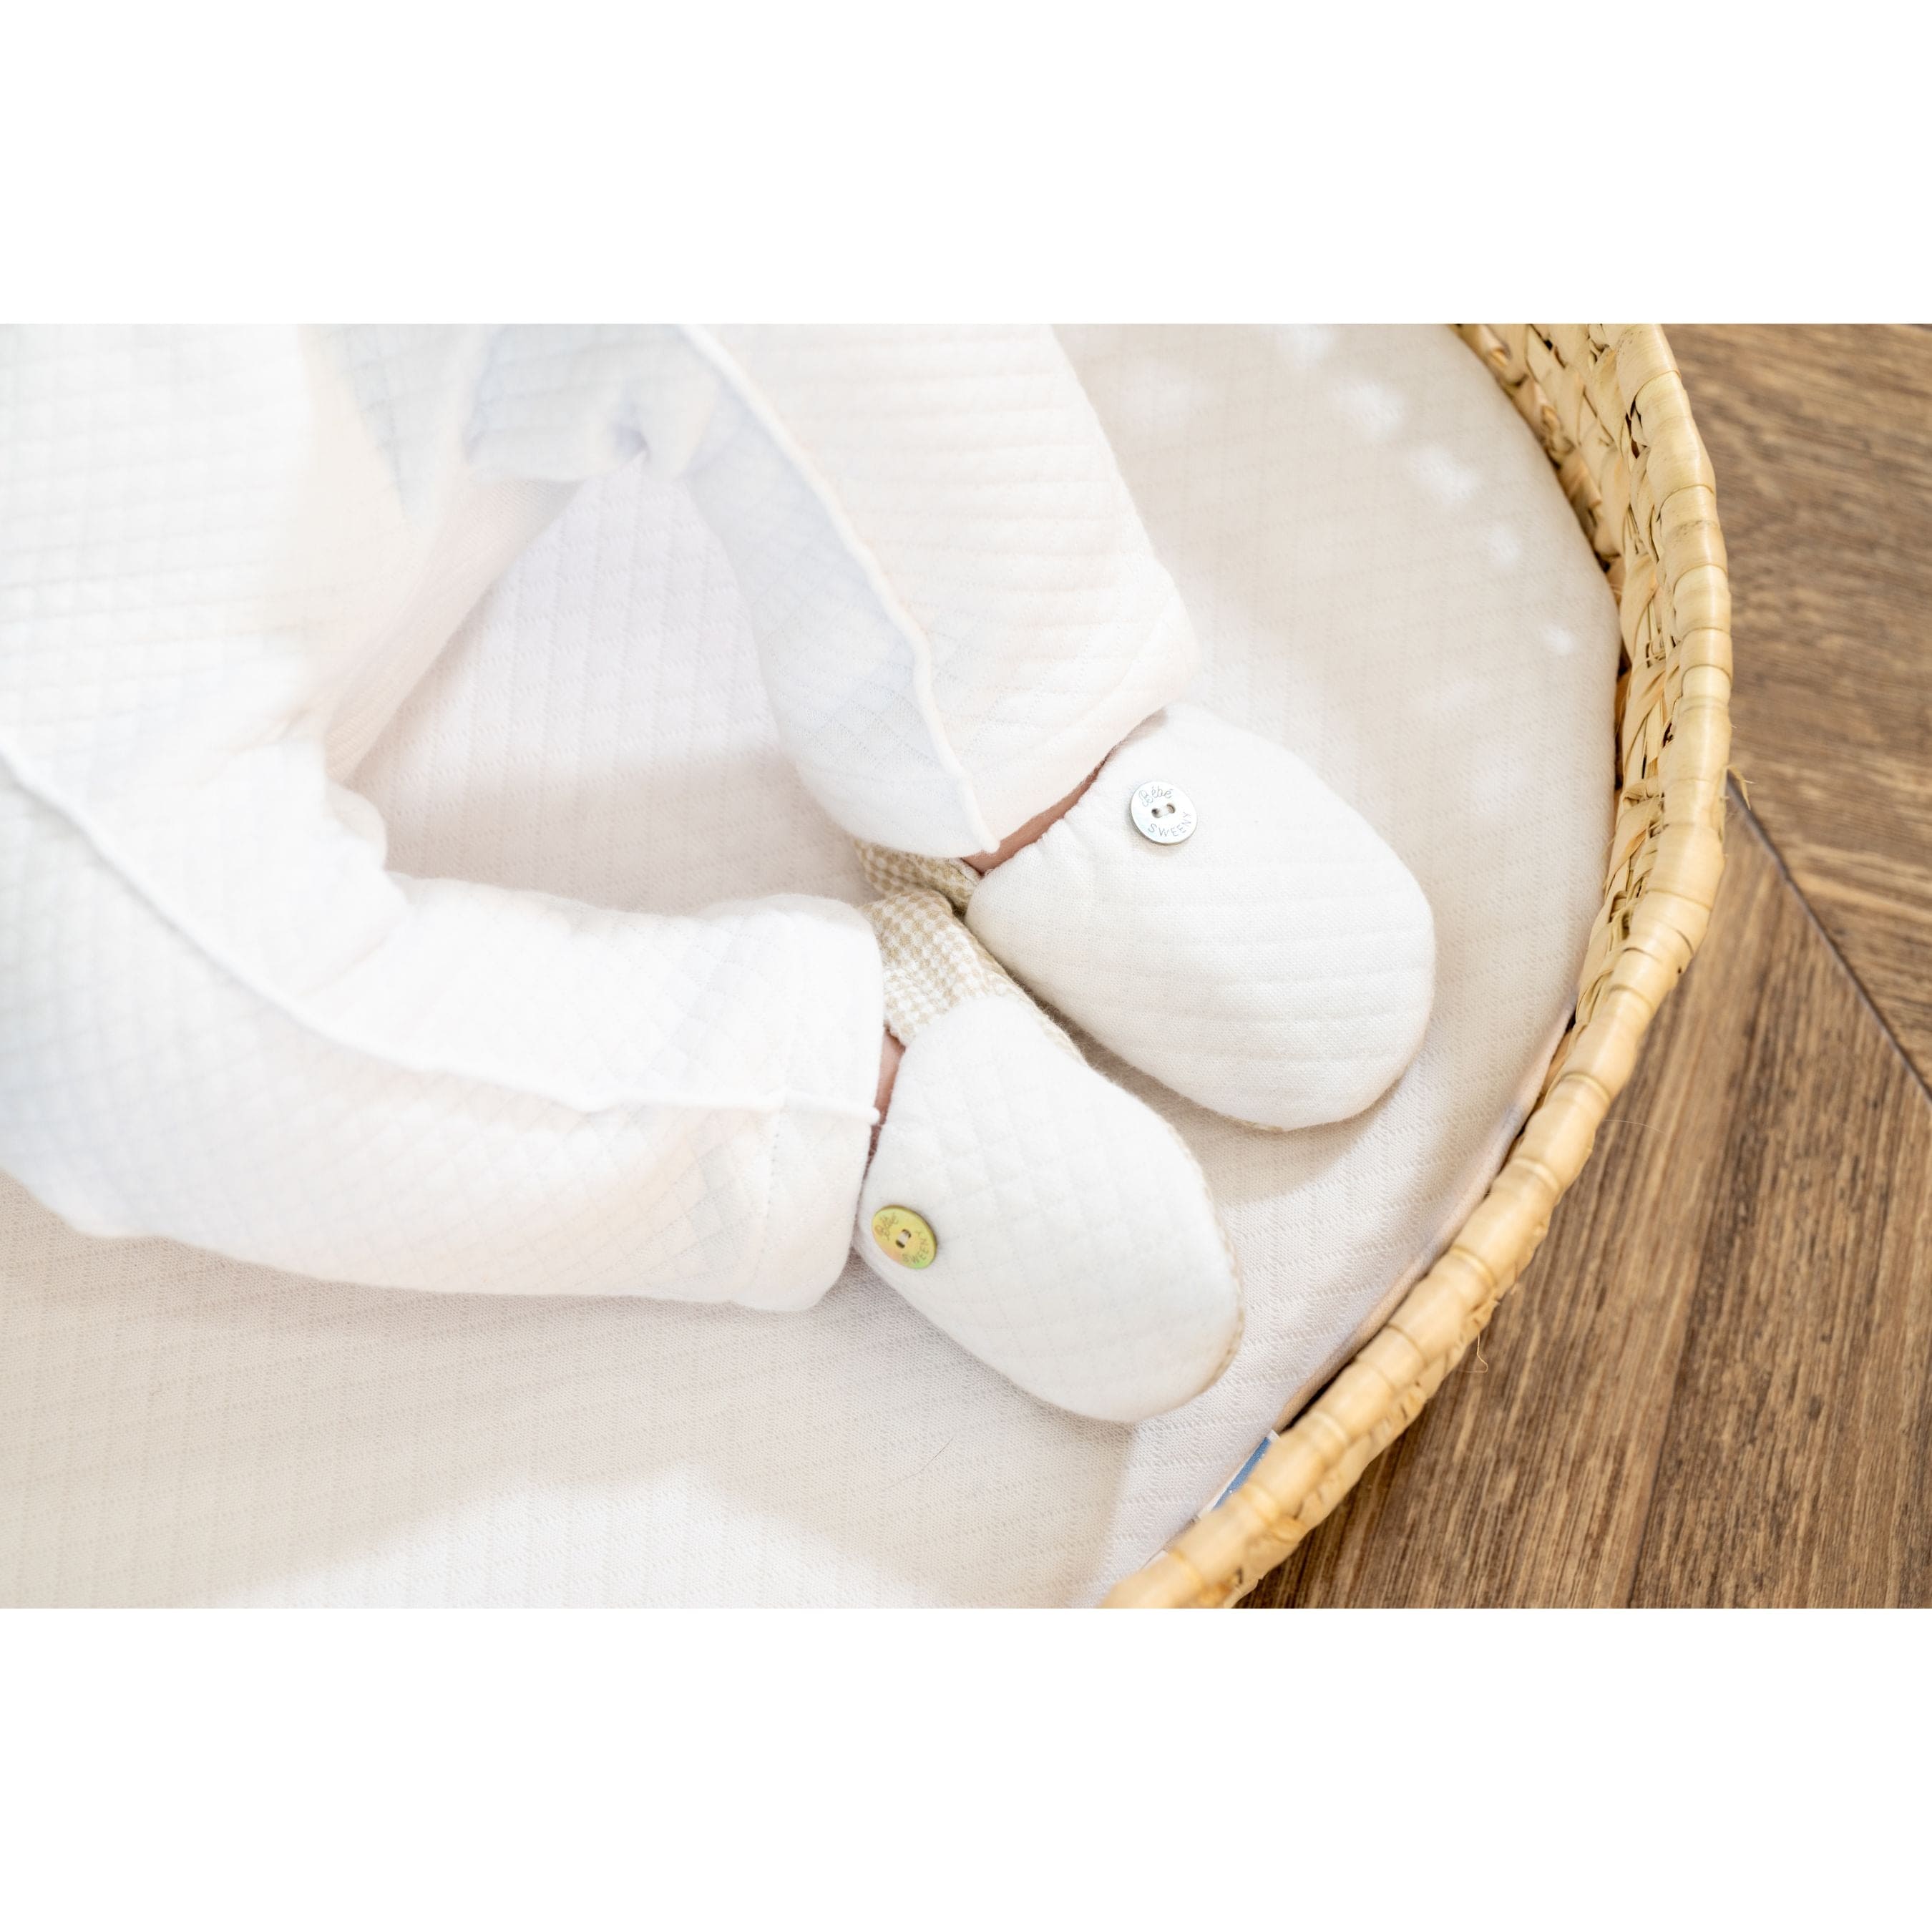 Lucas | Boys White & Blue Cotton Gingham Booties